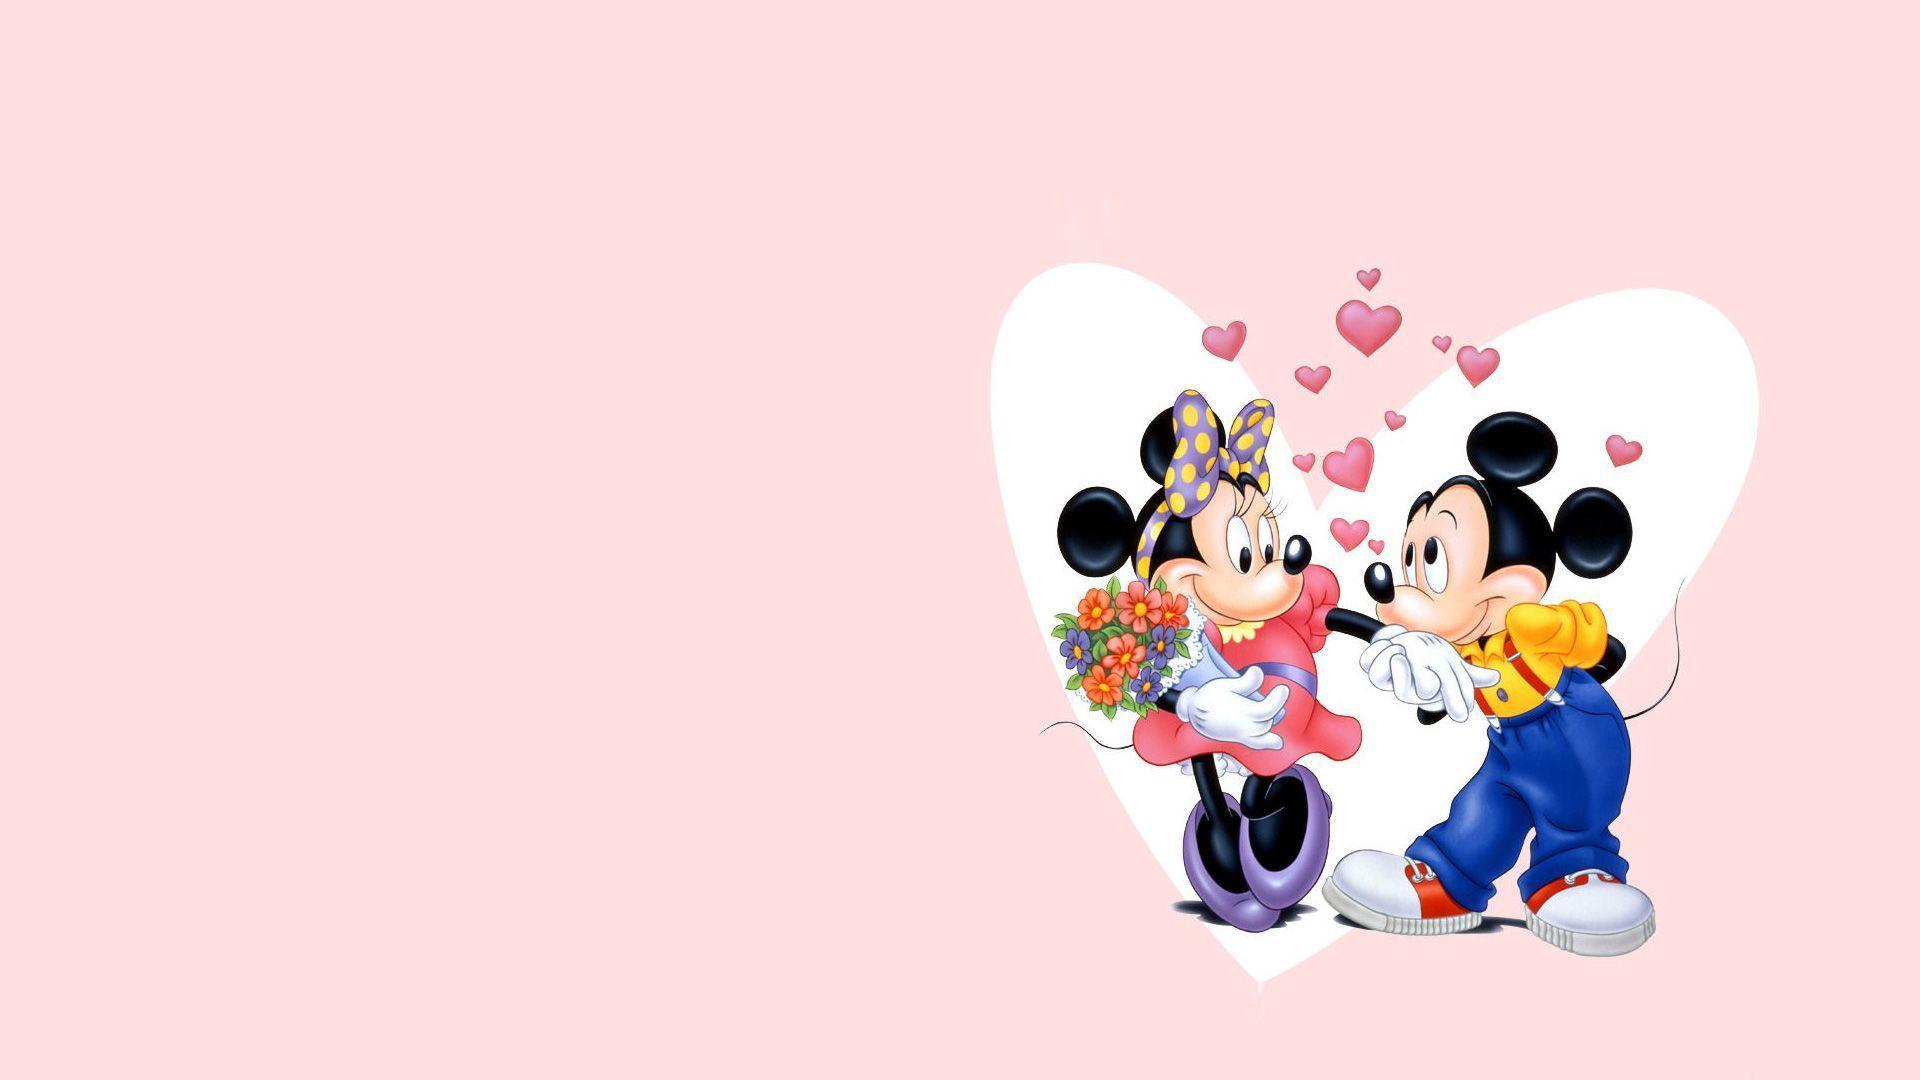 Mickey Mouse And Minnie Mouse Disney Cartoon Love Wallpaper